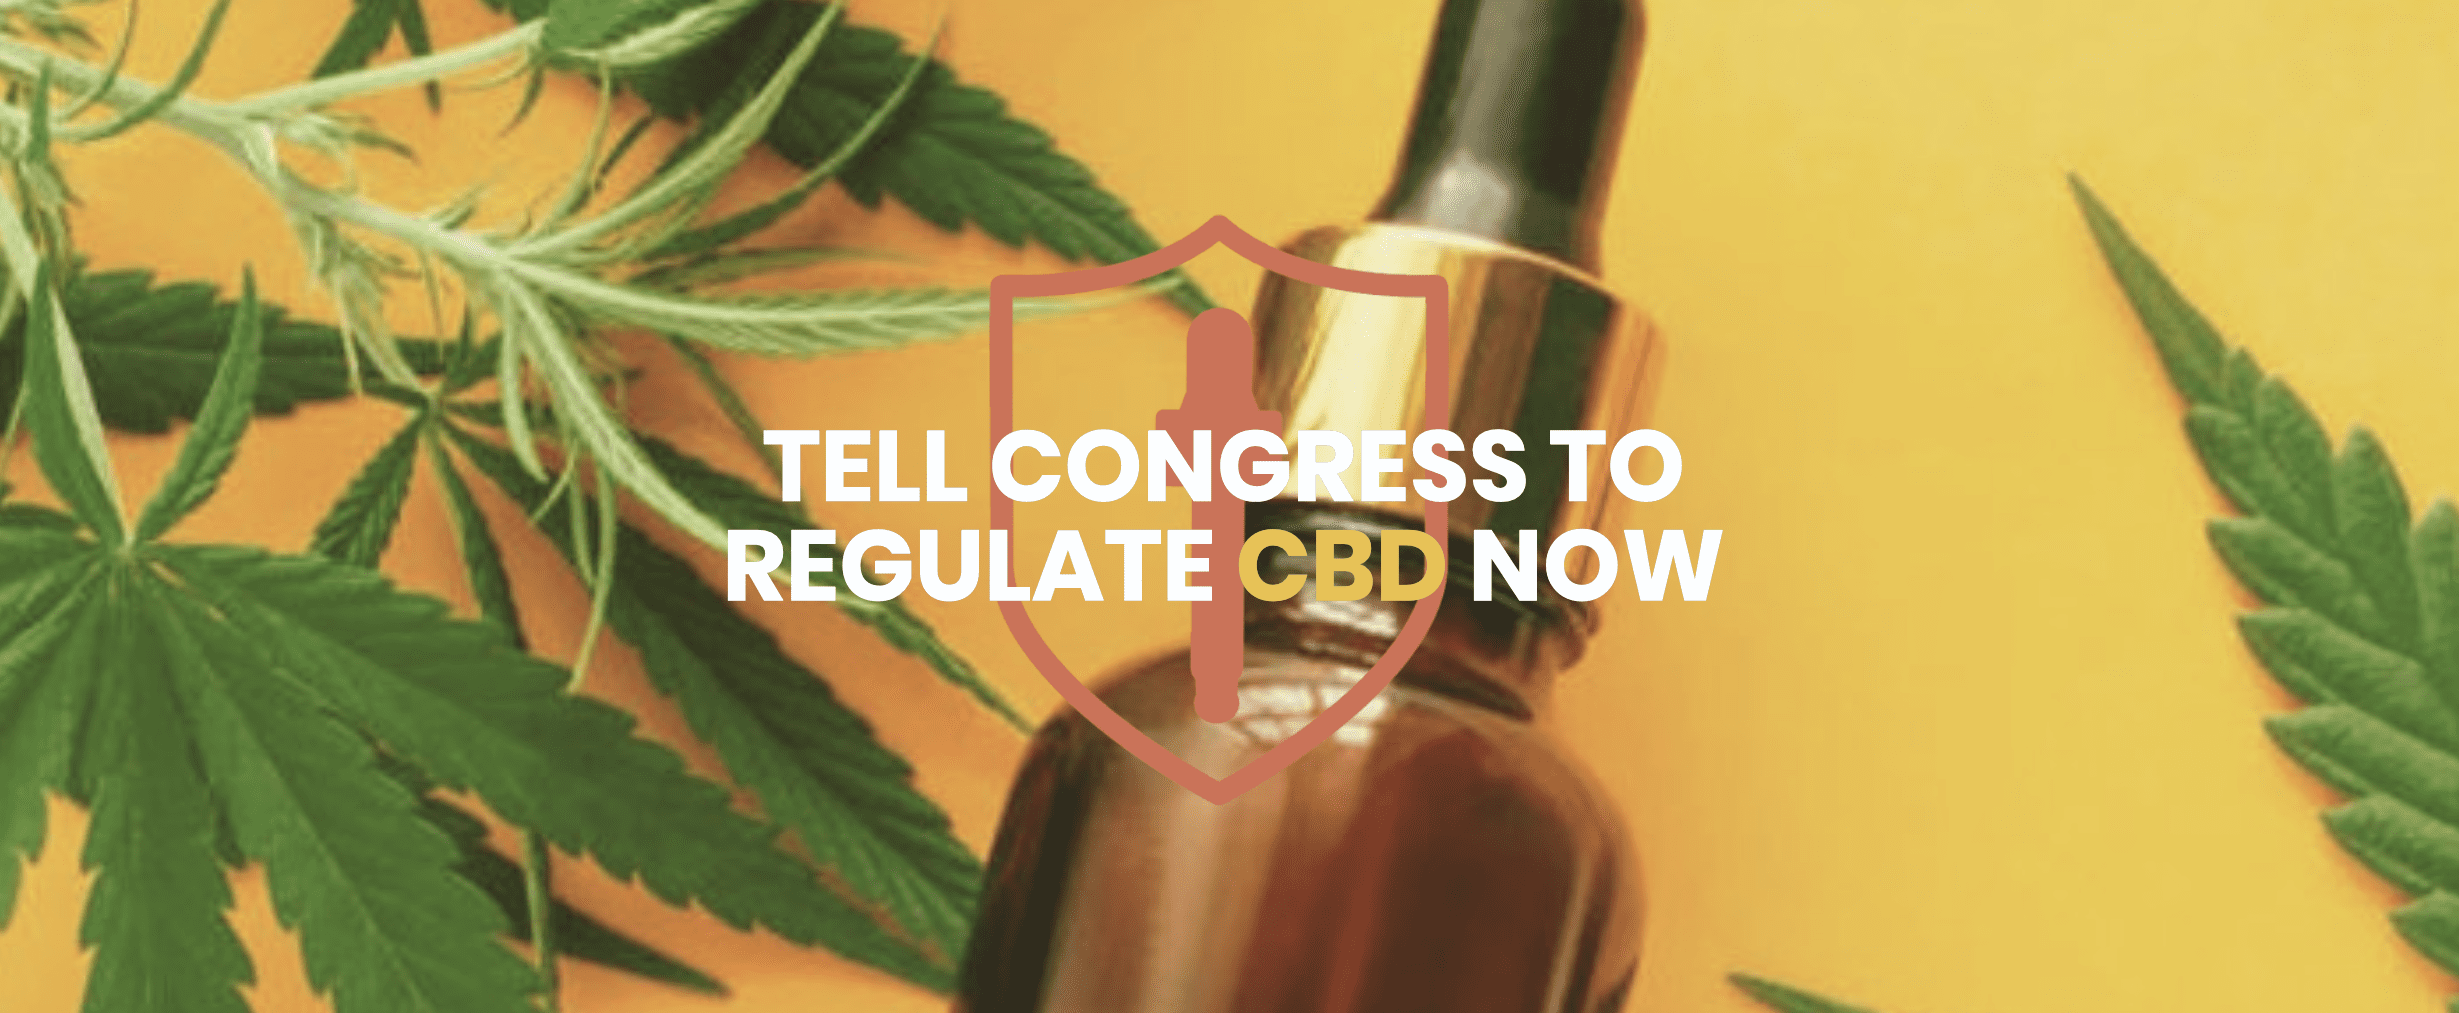 URGENT! Call On Congress To Stop The Stalemate and Regulate CBD now